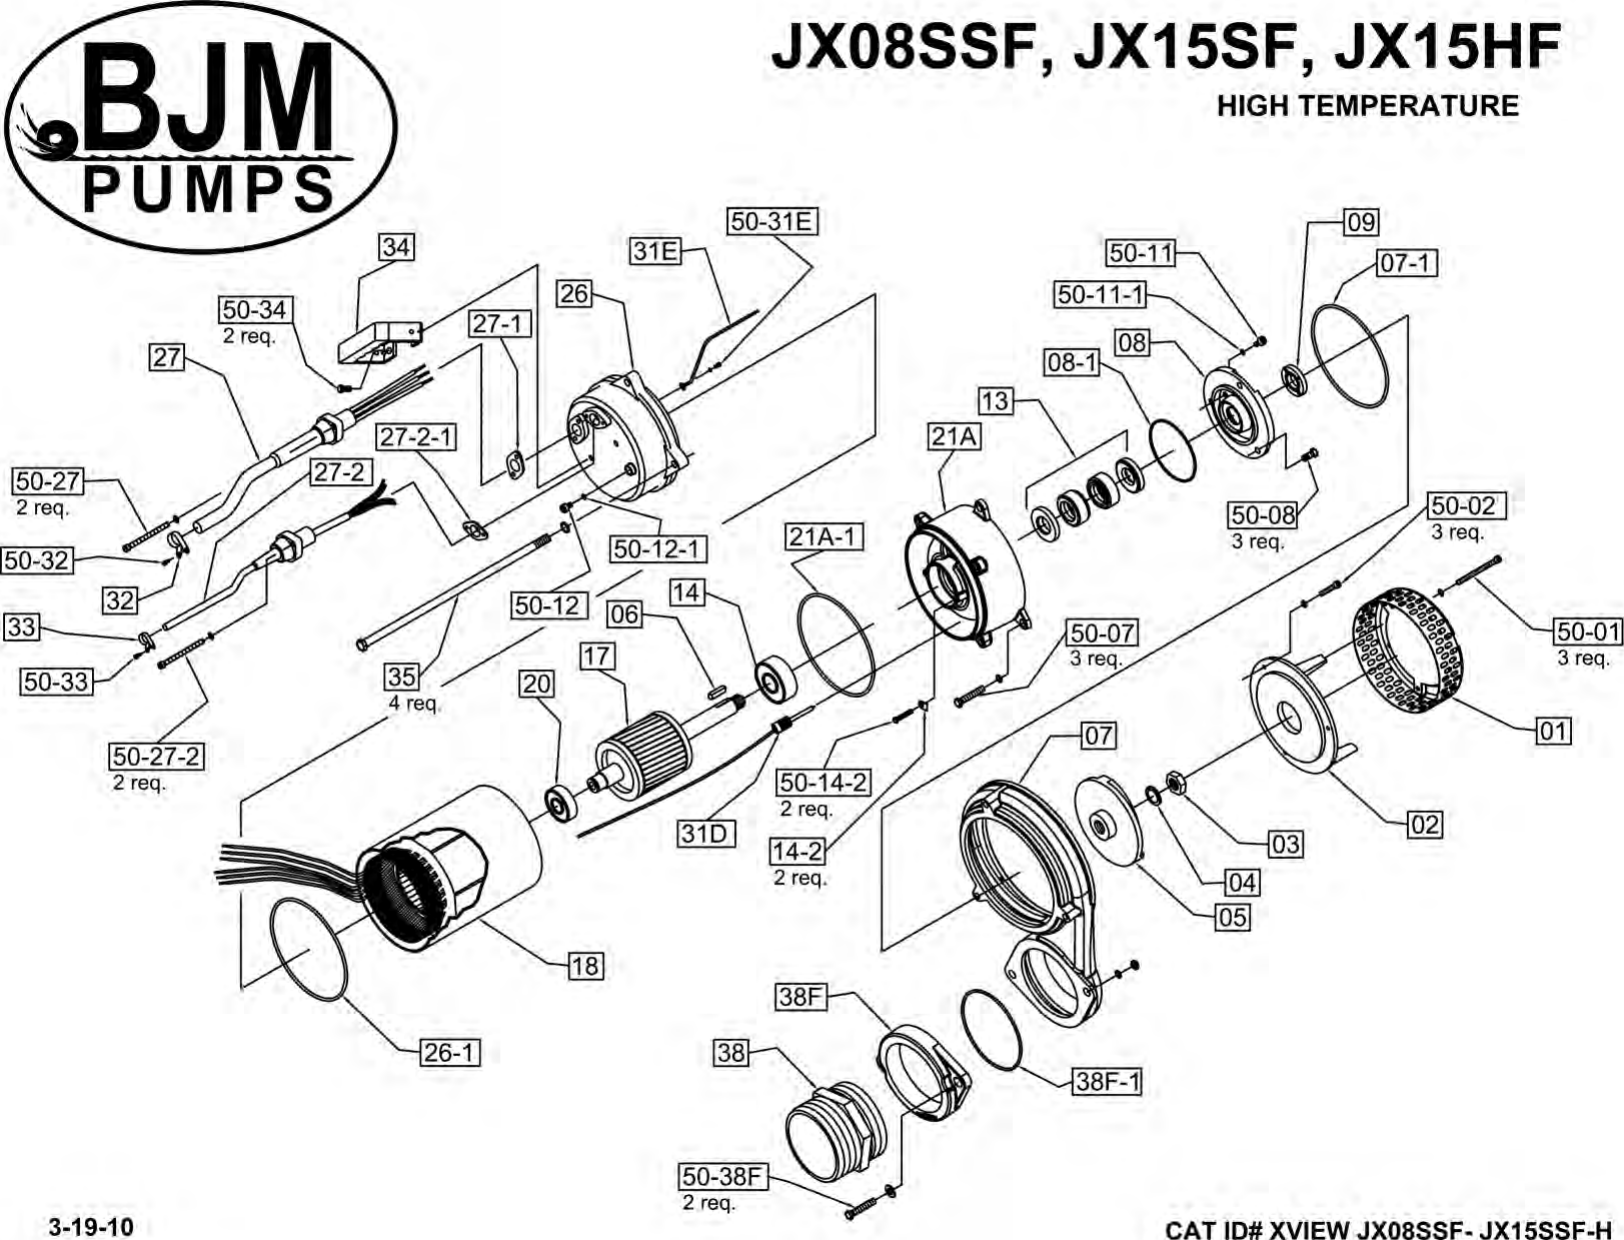 Page 3 of 5 - 136284 6 Bjm Jxf Series Exploded View User Manual